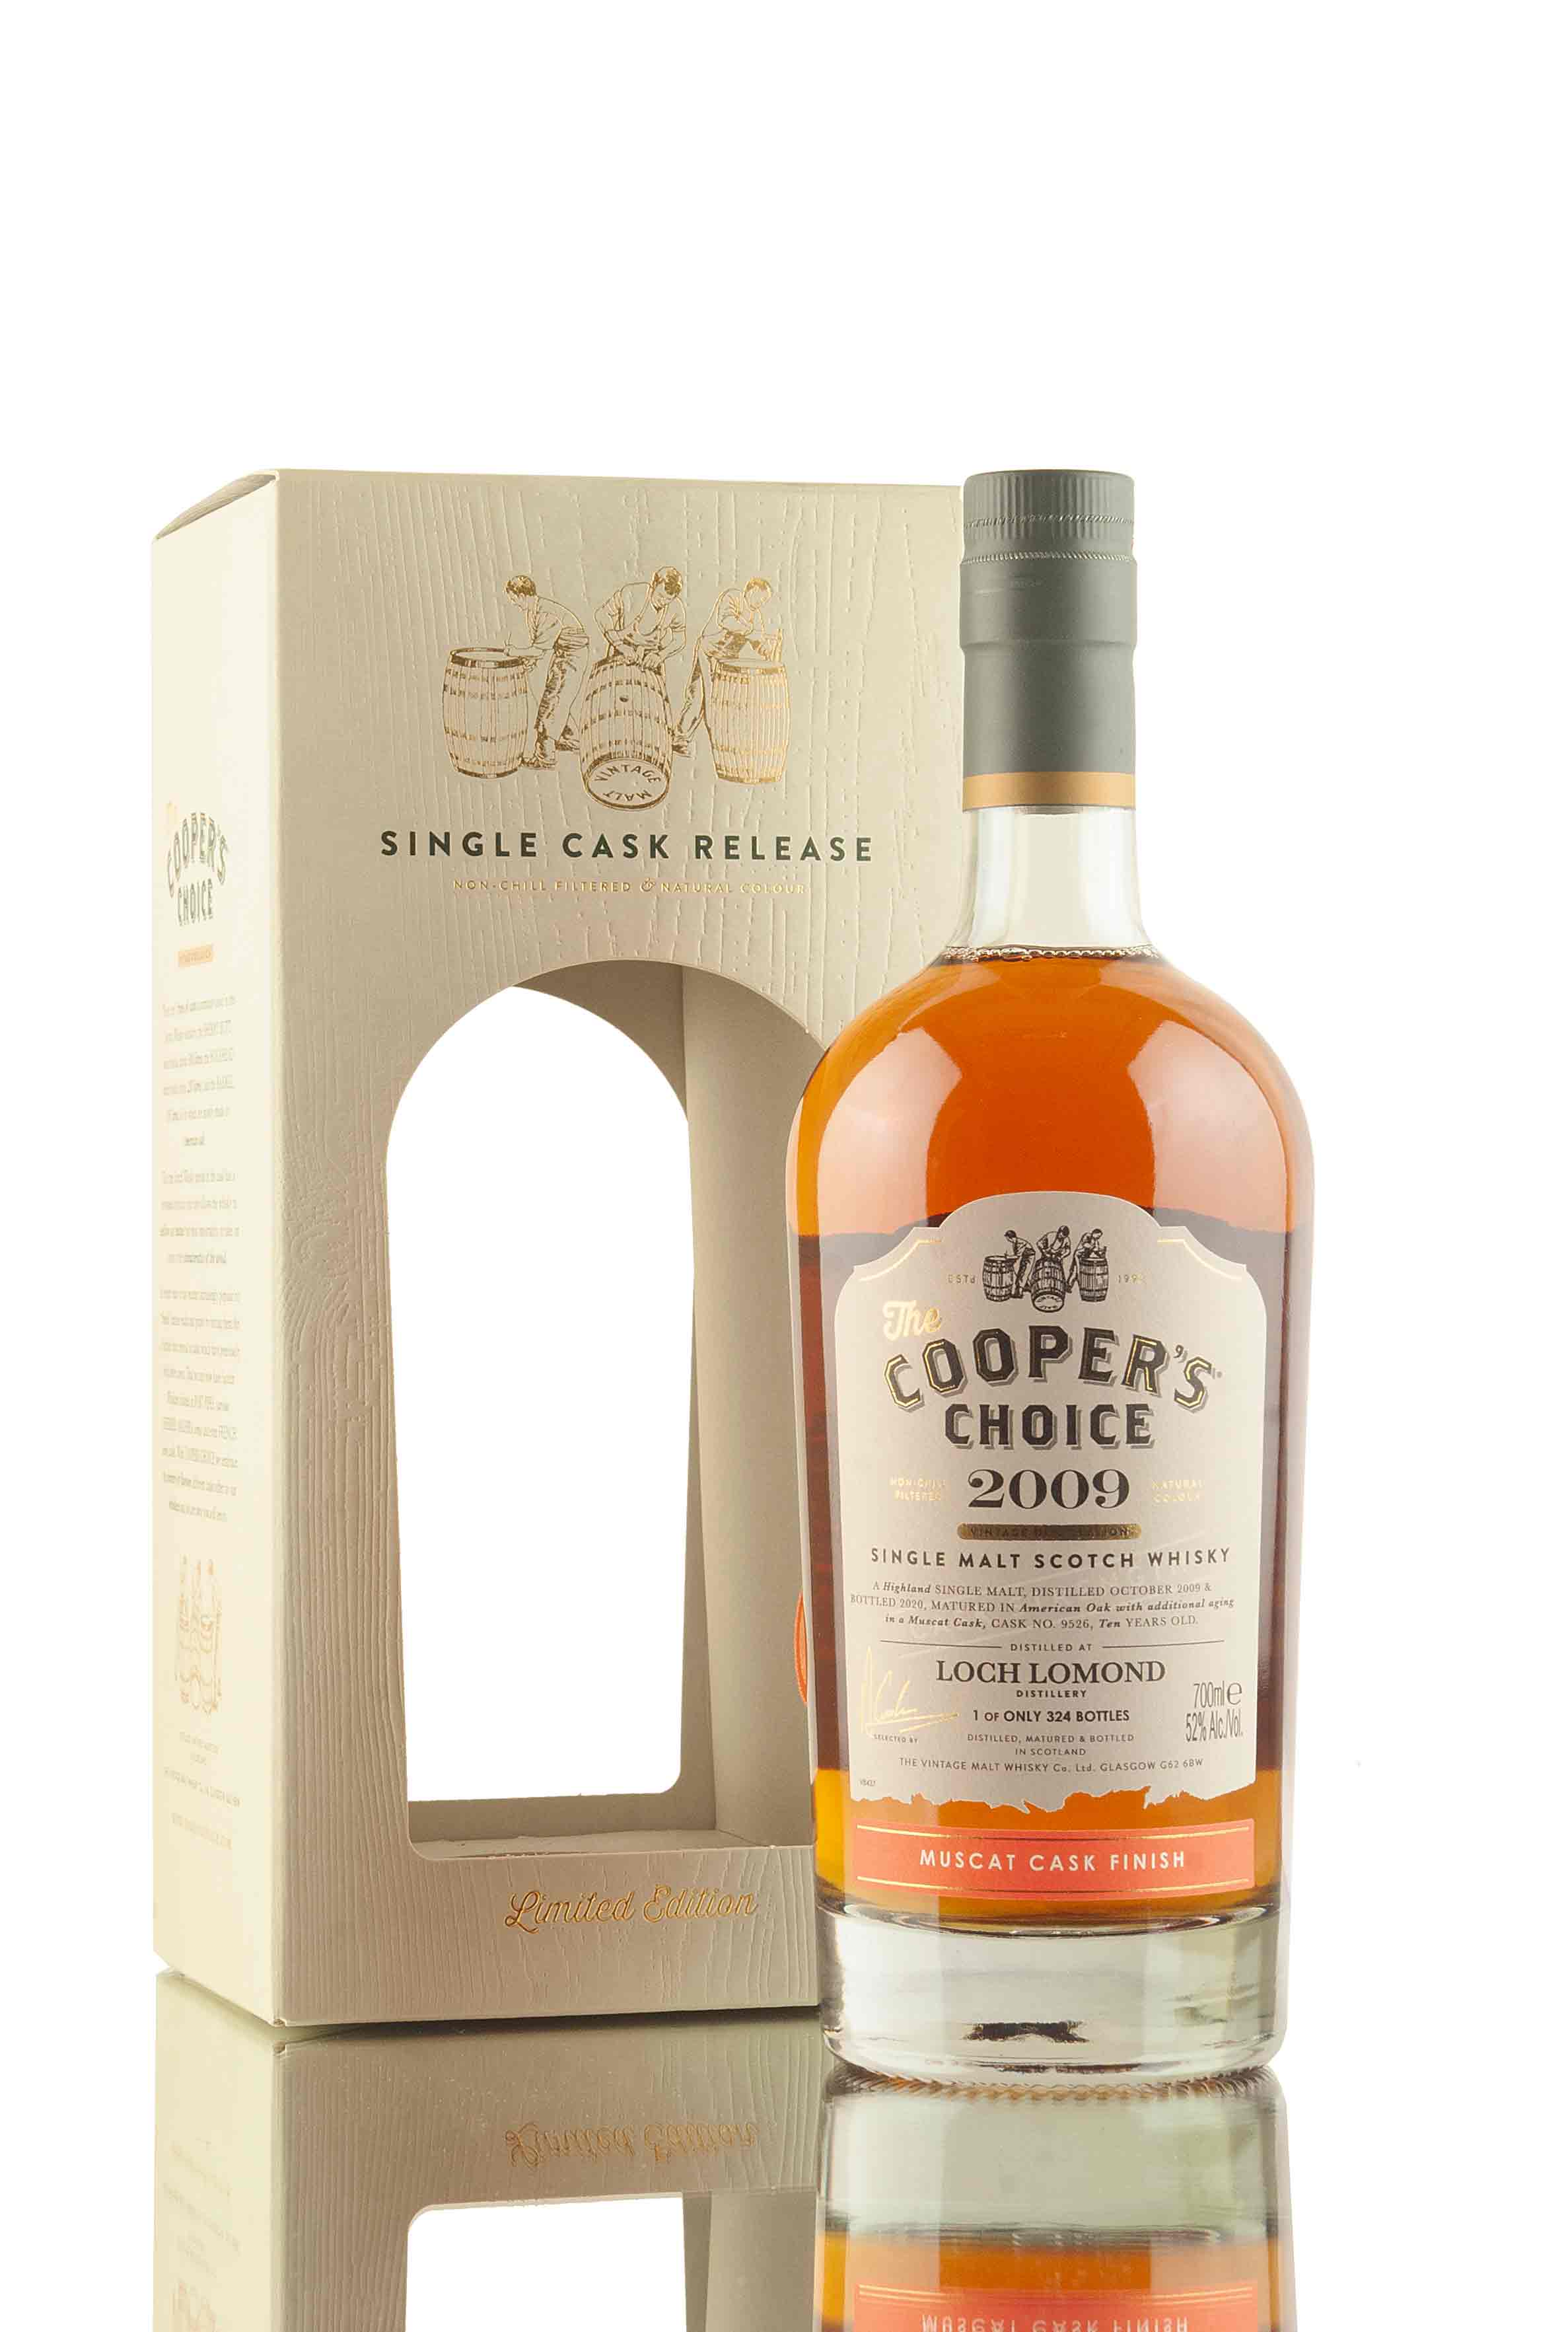 Loch Lomond 10 Year Old - 2009 | Cask 9526 | The Cooper's Choice | Abbey Whisky